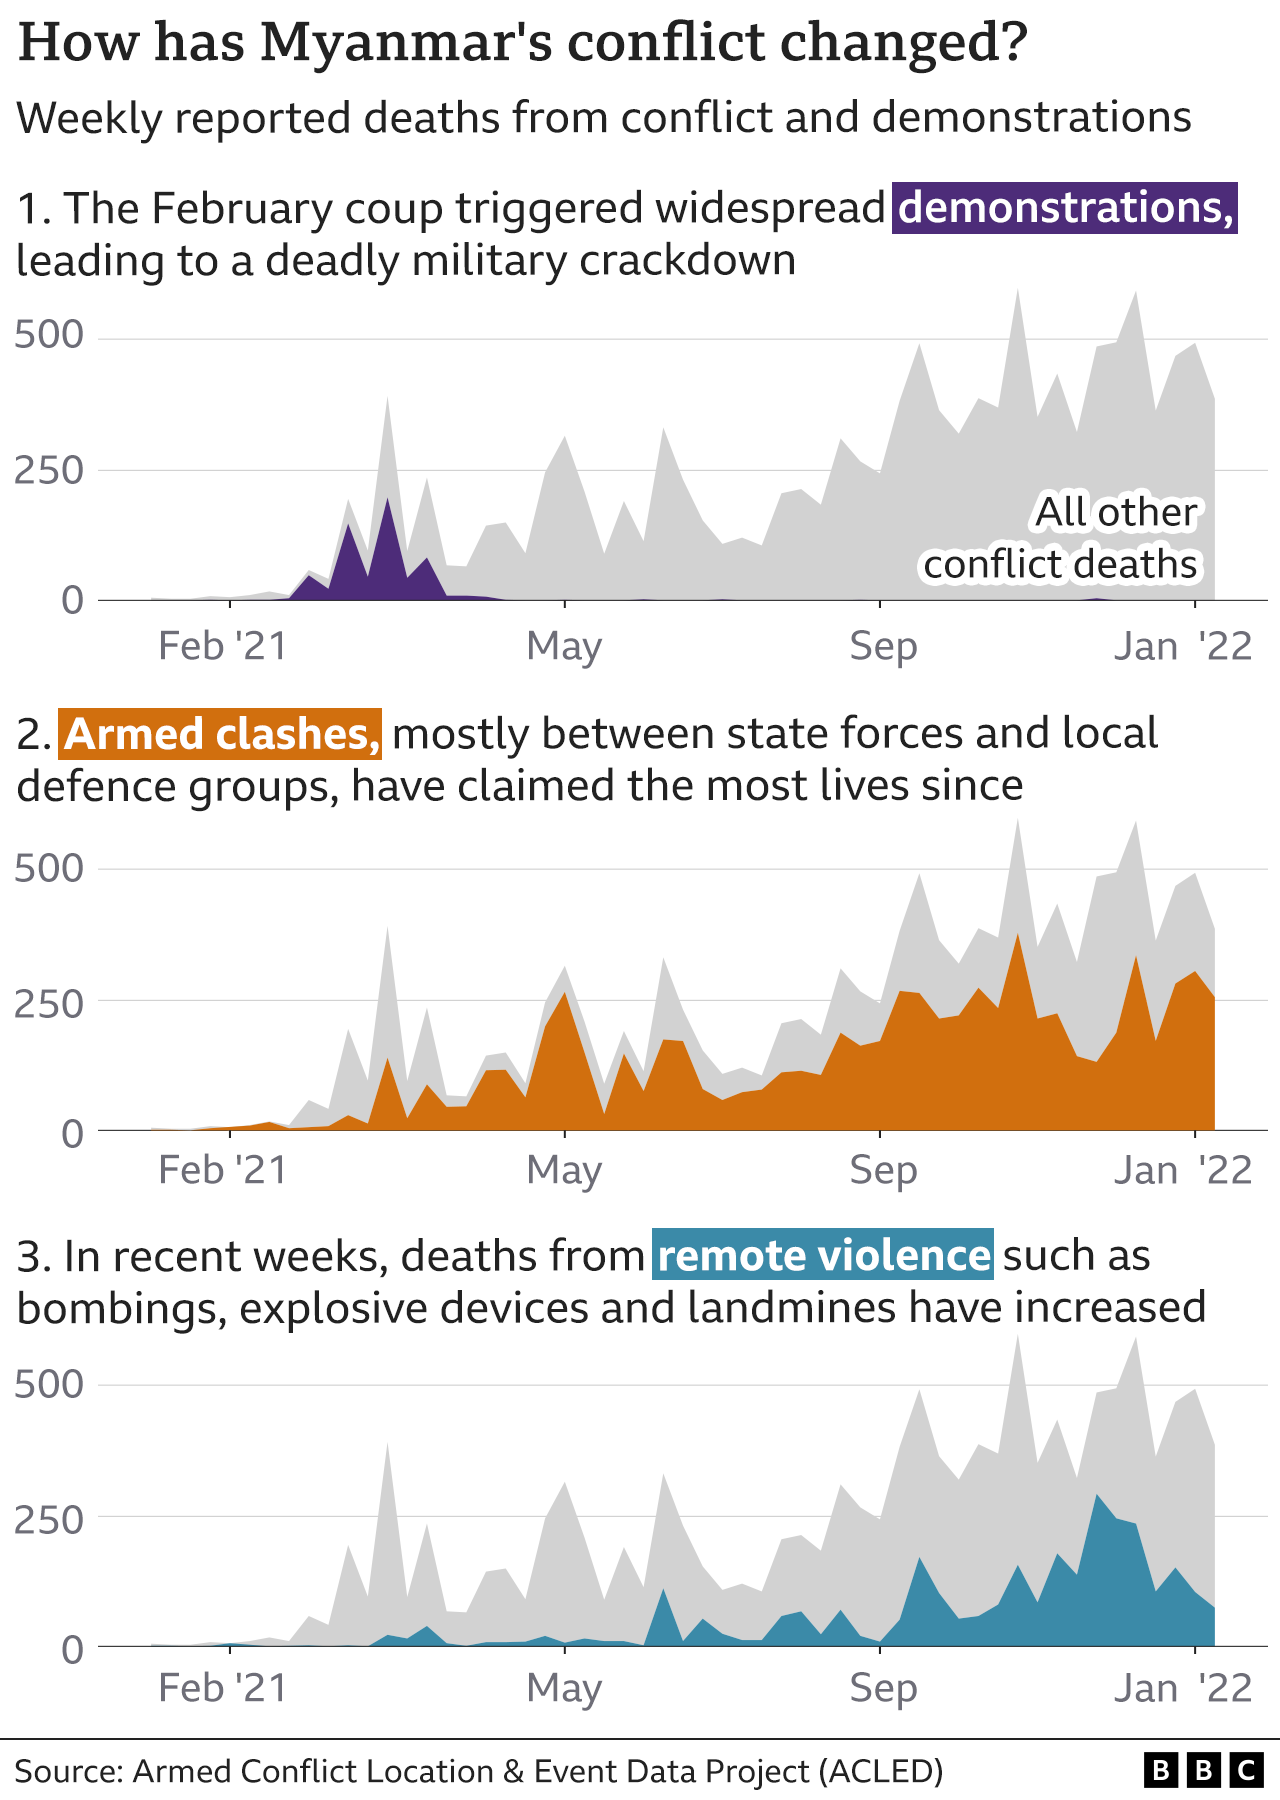 Graphic visualising the changing pattern of the conflict in Myanmar, showing how in the initial weeks following the February 2021 coup most deaths came in protests and riots, while since then armed clashes have claimed the most lives, with a recent uptick in fatalities from remote violence such as explosives and landmines